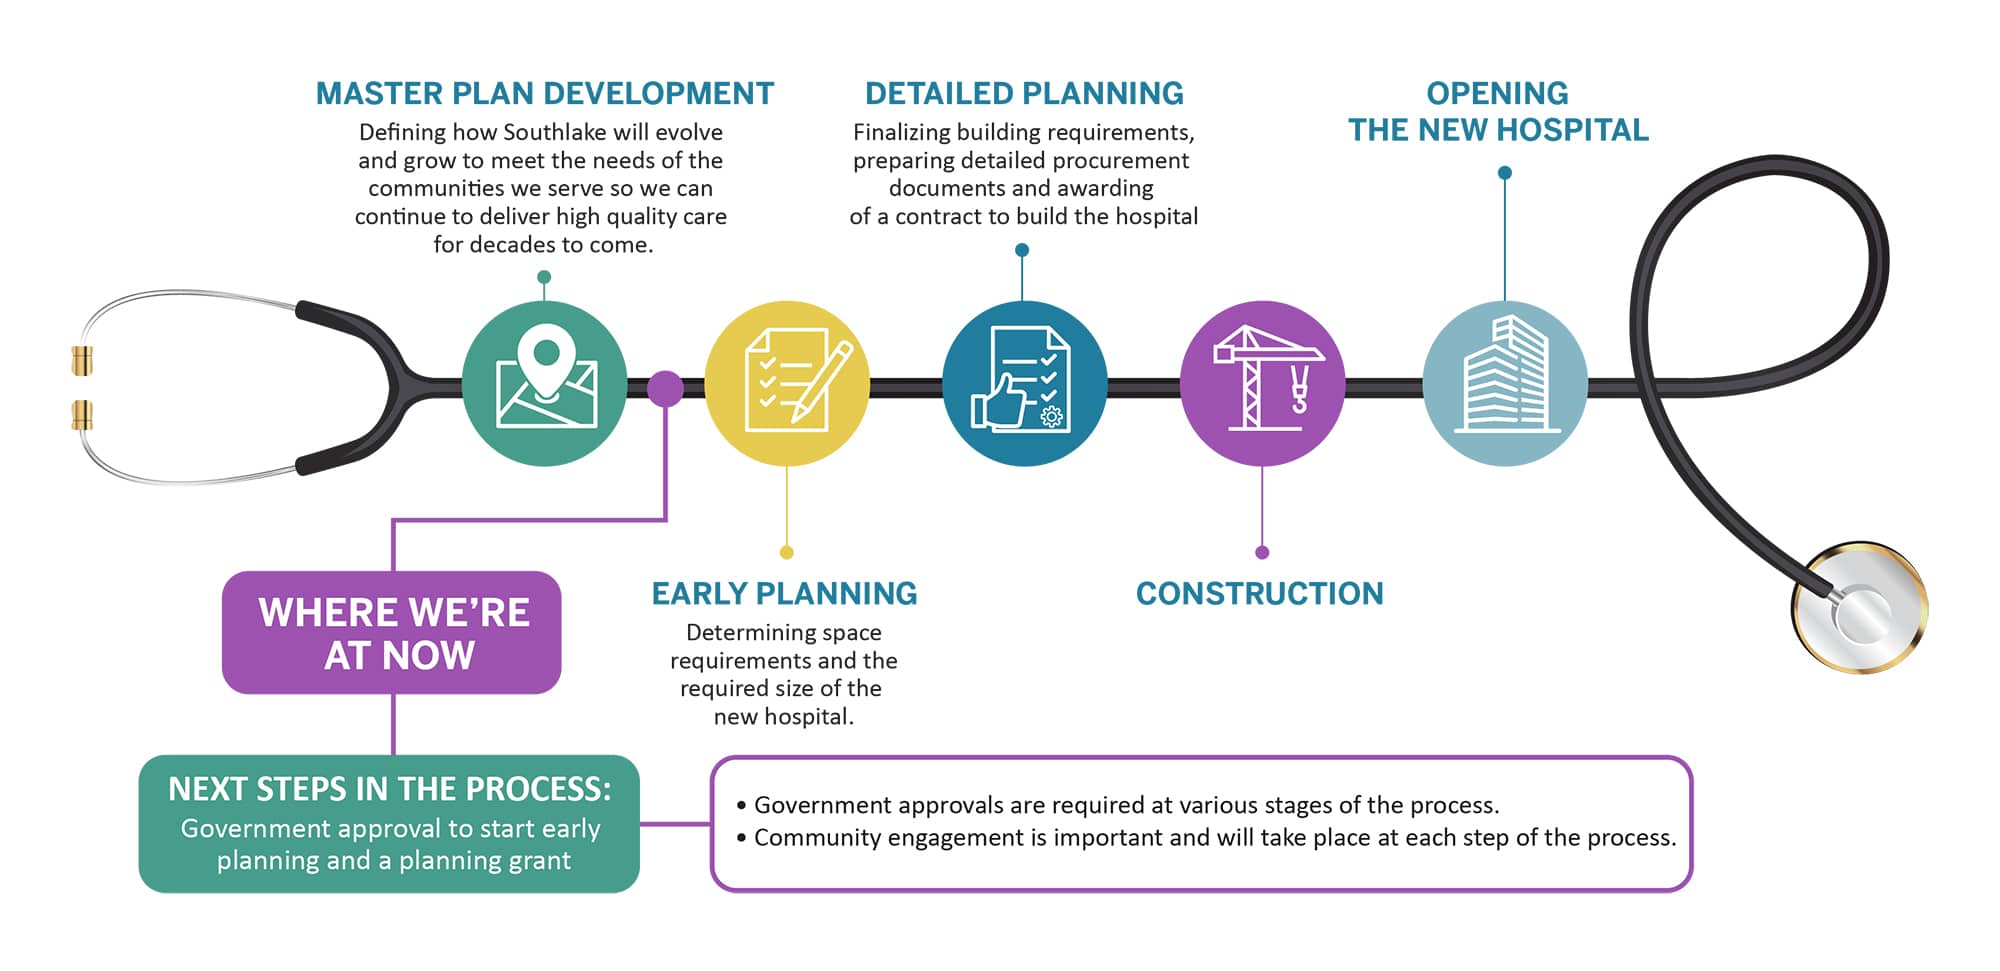 Timeline infographic describing the process for major hospital capital projects in Ontario, starting with Master Plan Development, Early Planning, Detailed Planning, Construction, and Opening a New Hospital. The next step in the process is to achieve government approval to start early planning grant.